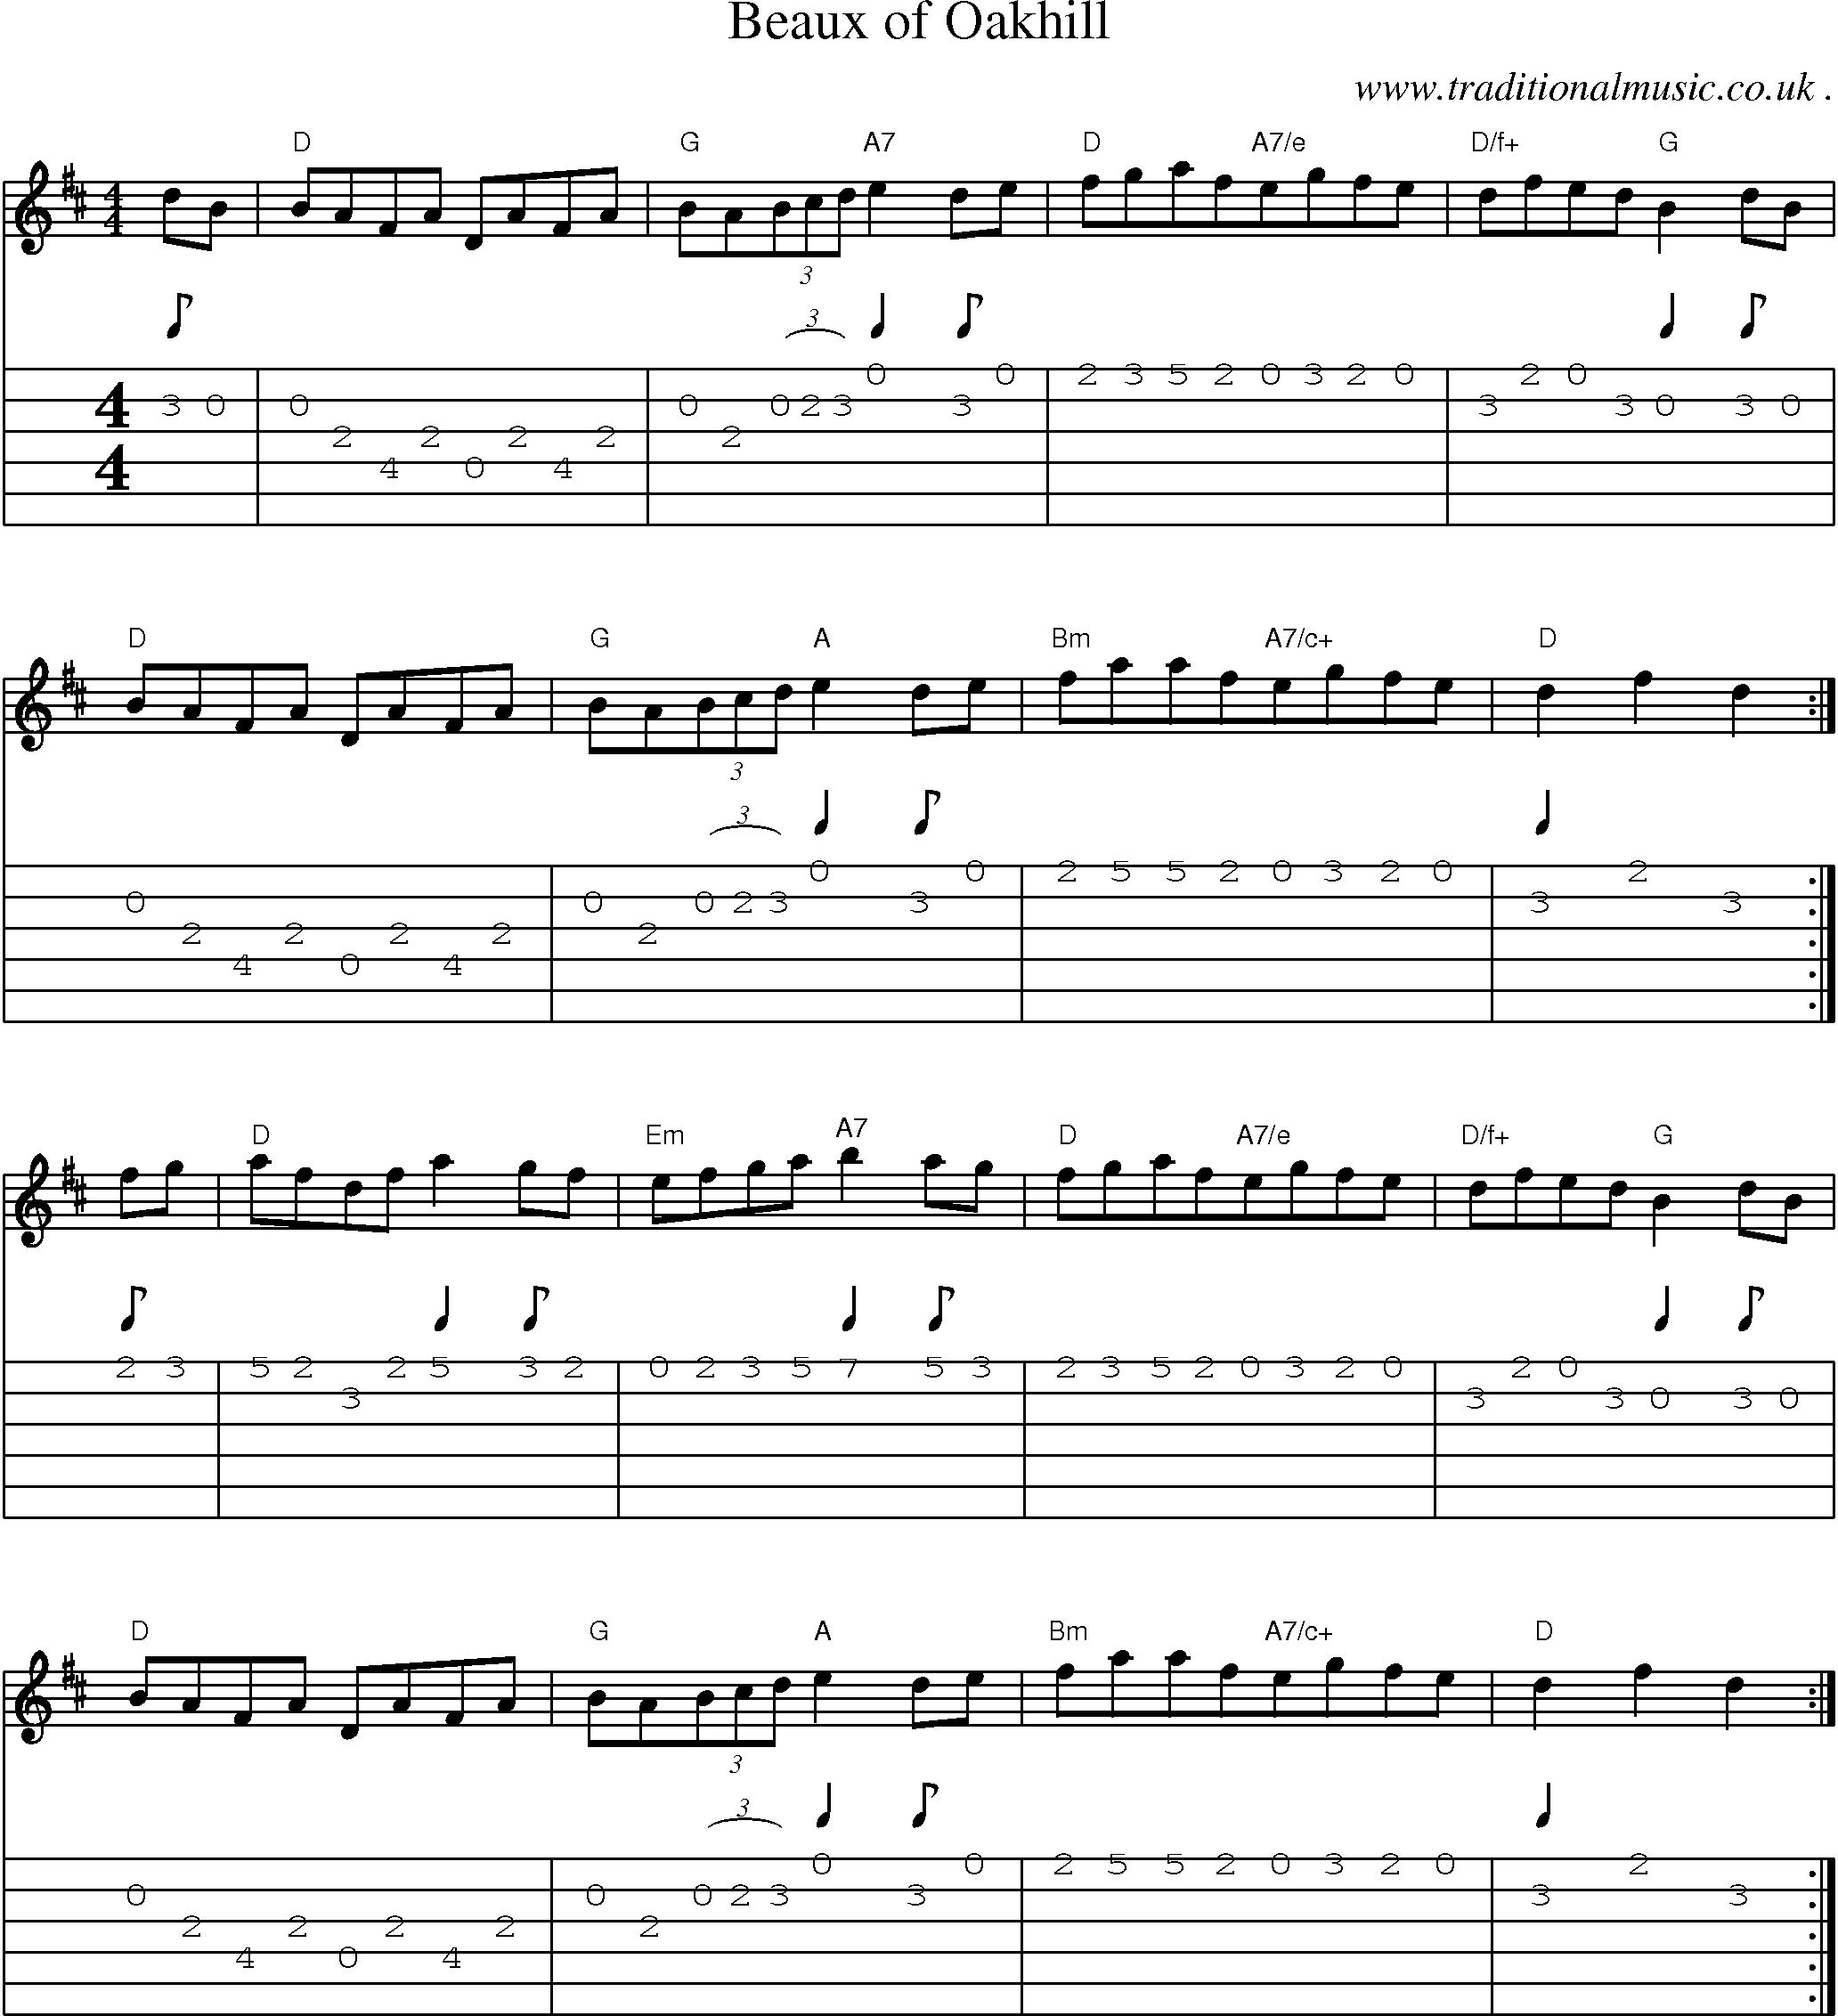 Sheet-Music and Guitar Tabs for Beaux Of Oakhill